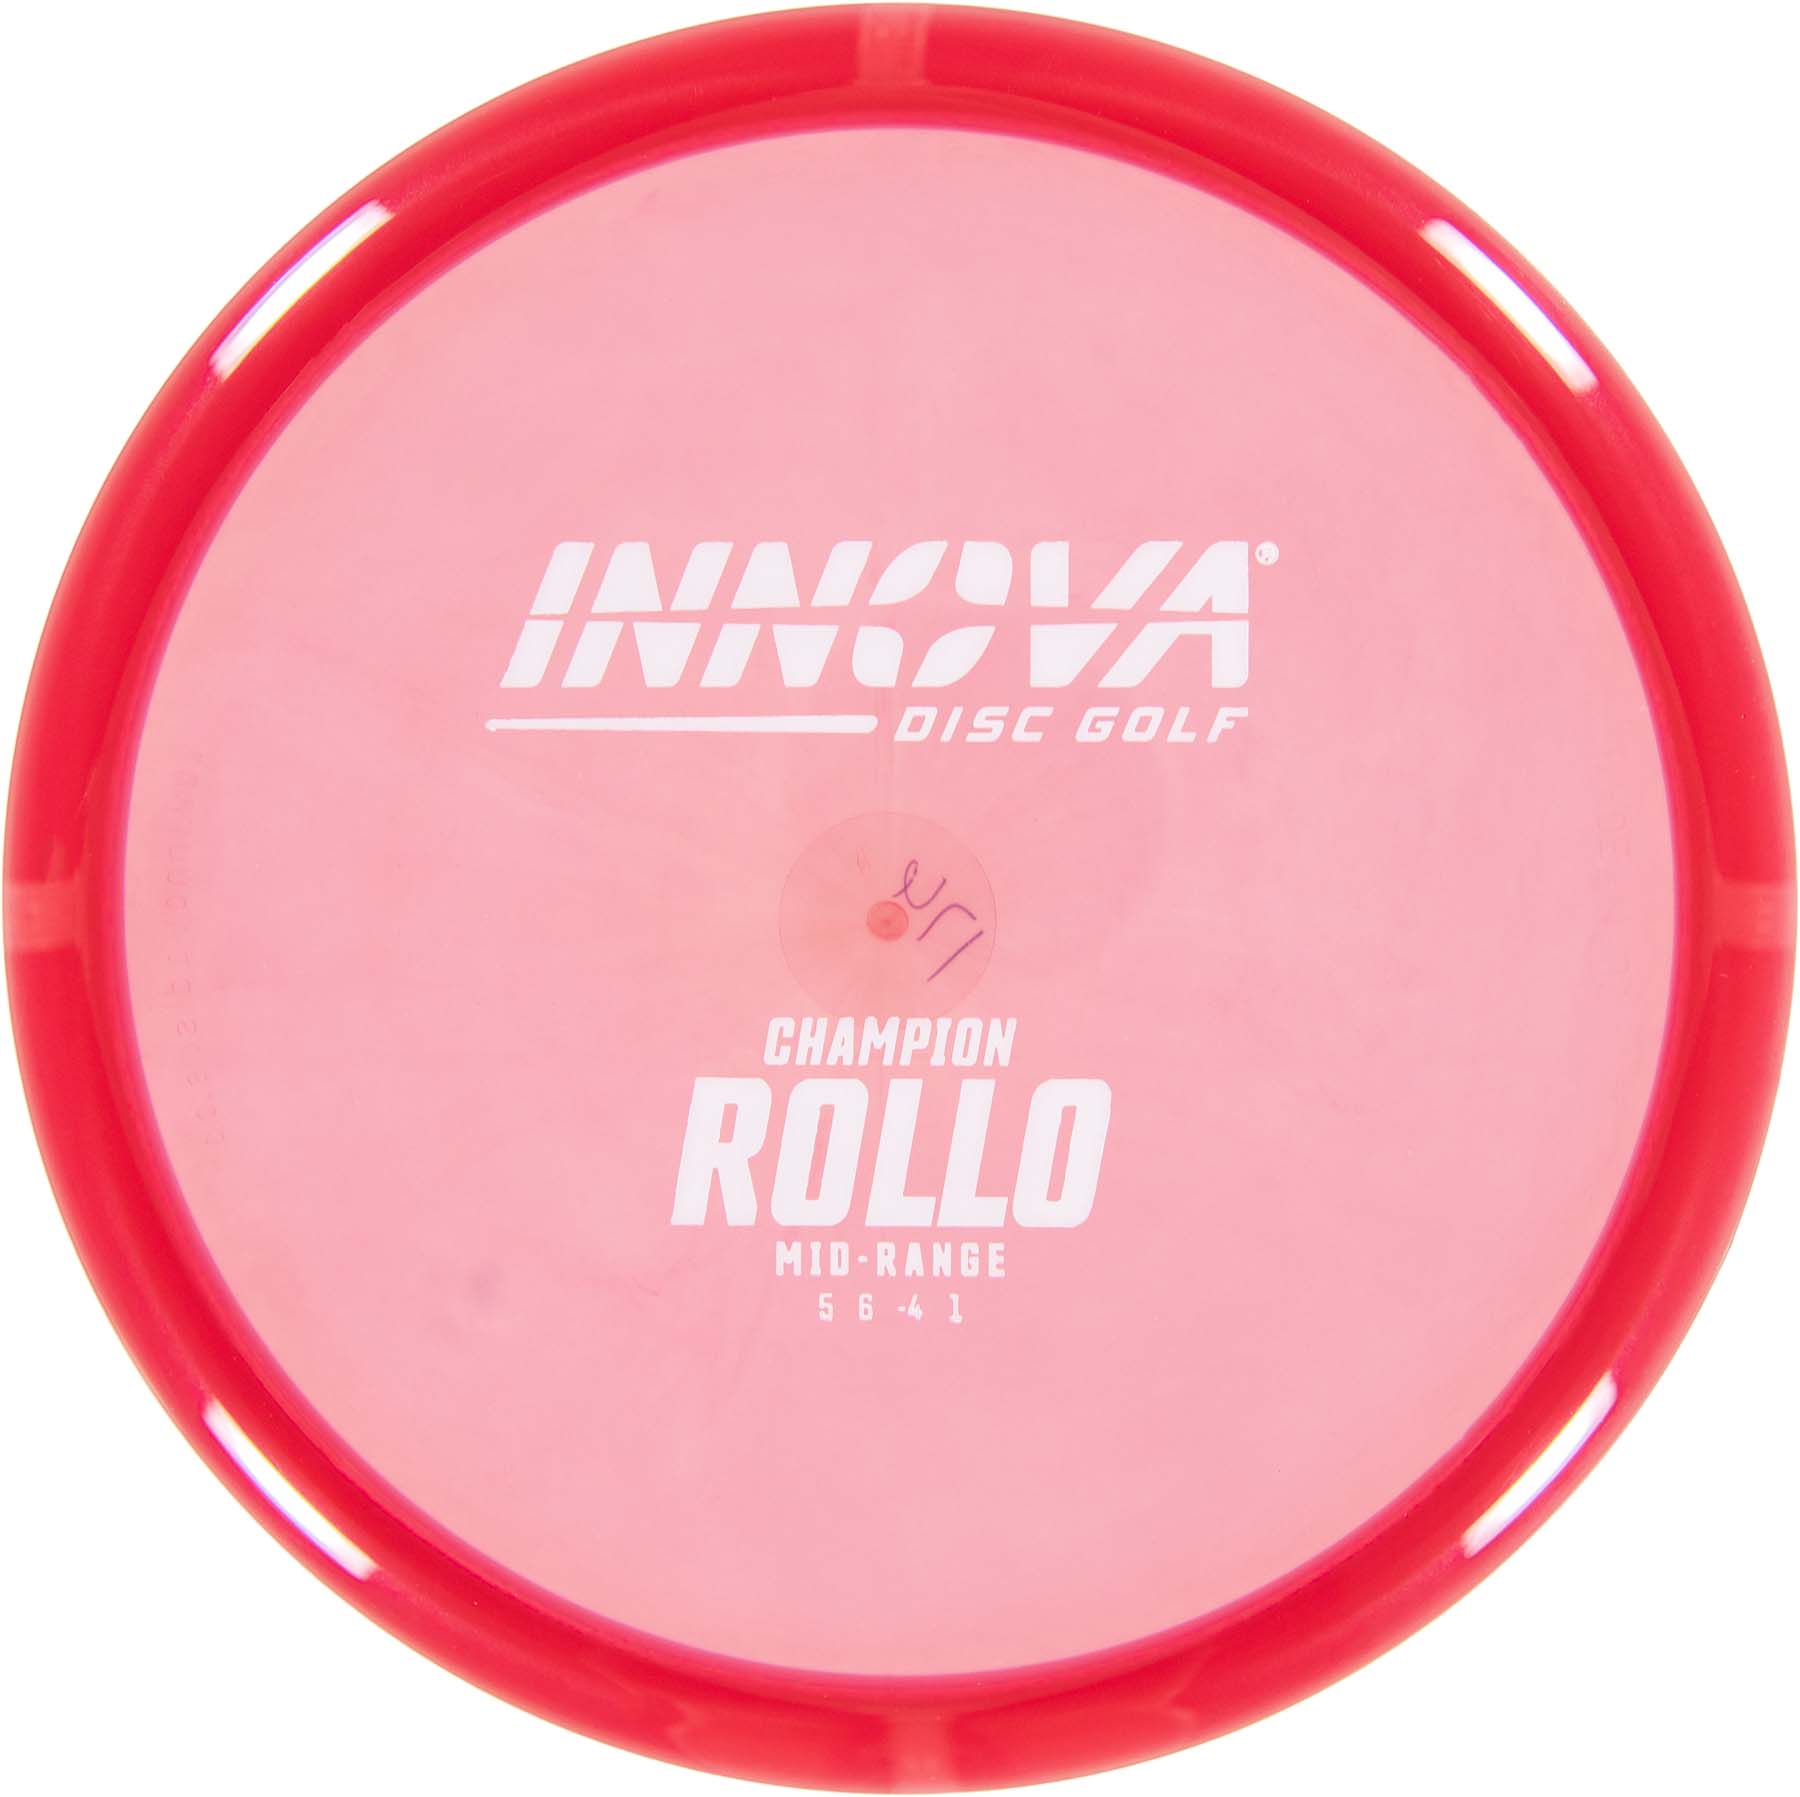 Champion Rollo from Disc Golf United